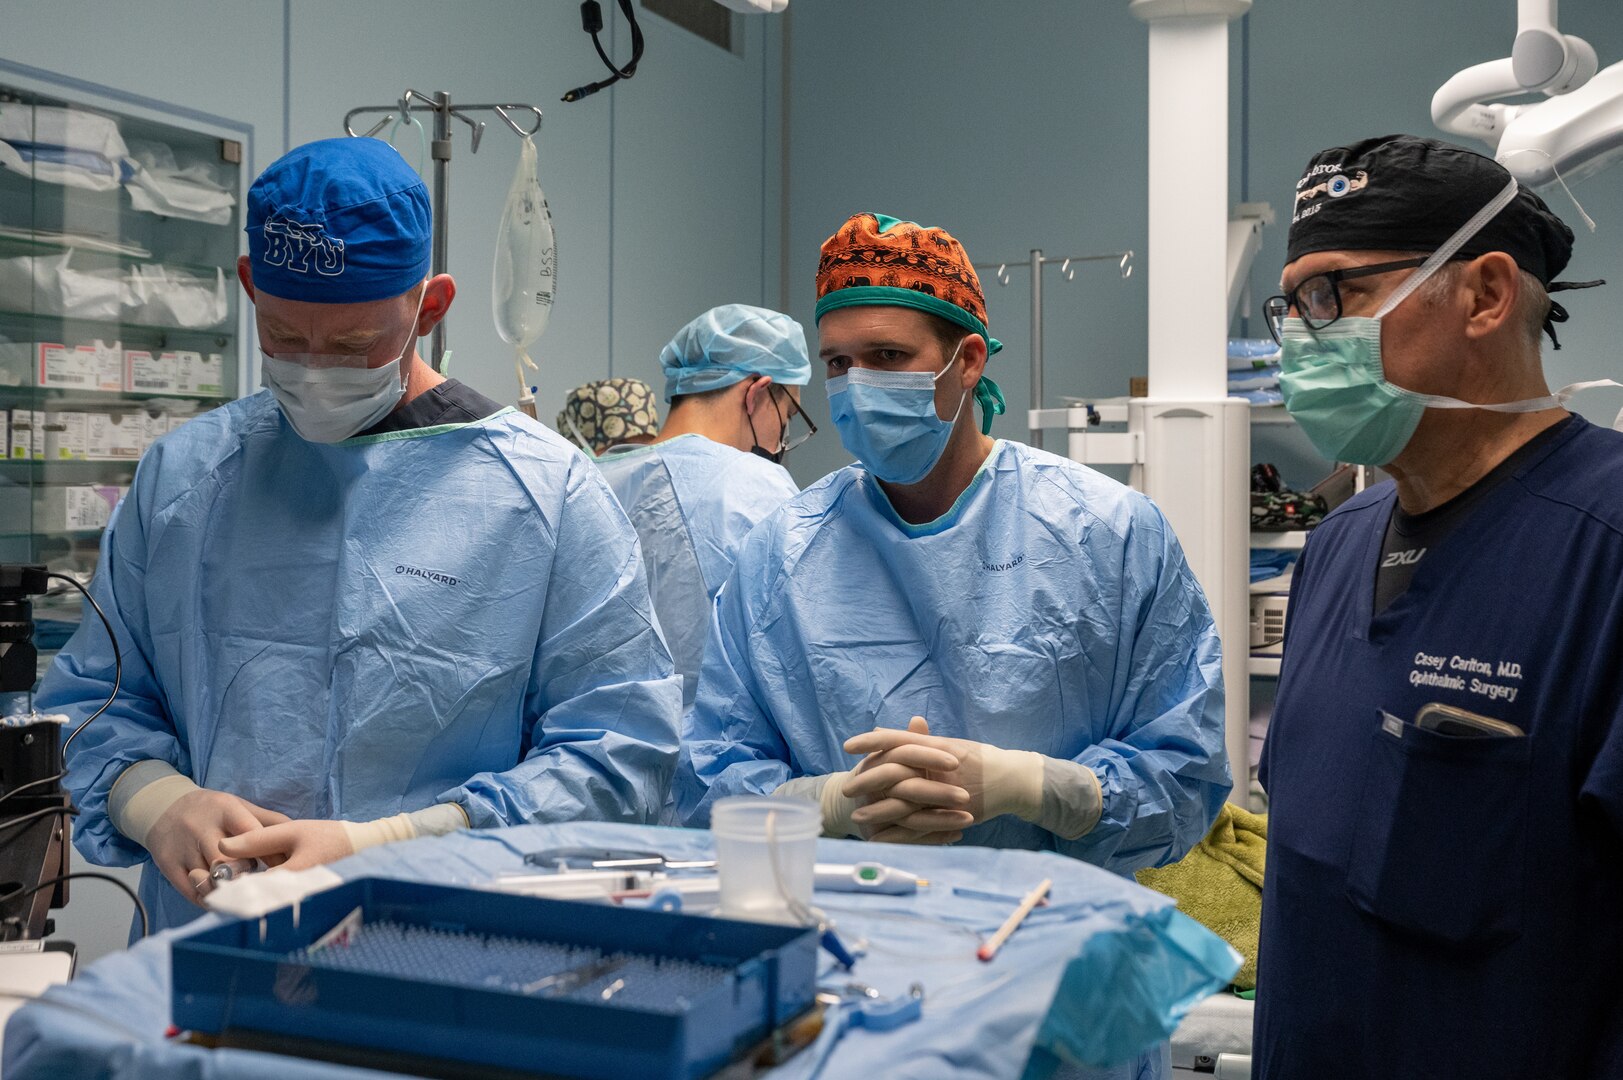 A team of ophthalmologists stand by a mayo stand full of medical instruments during a cataract surgery.